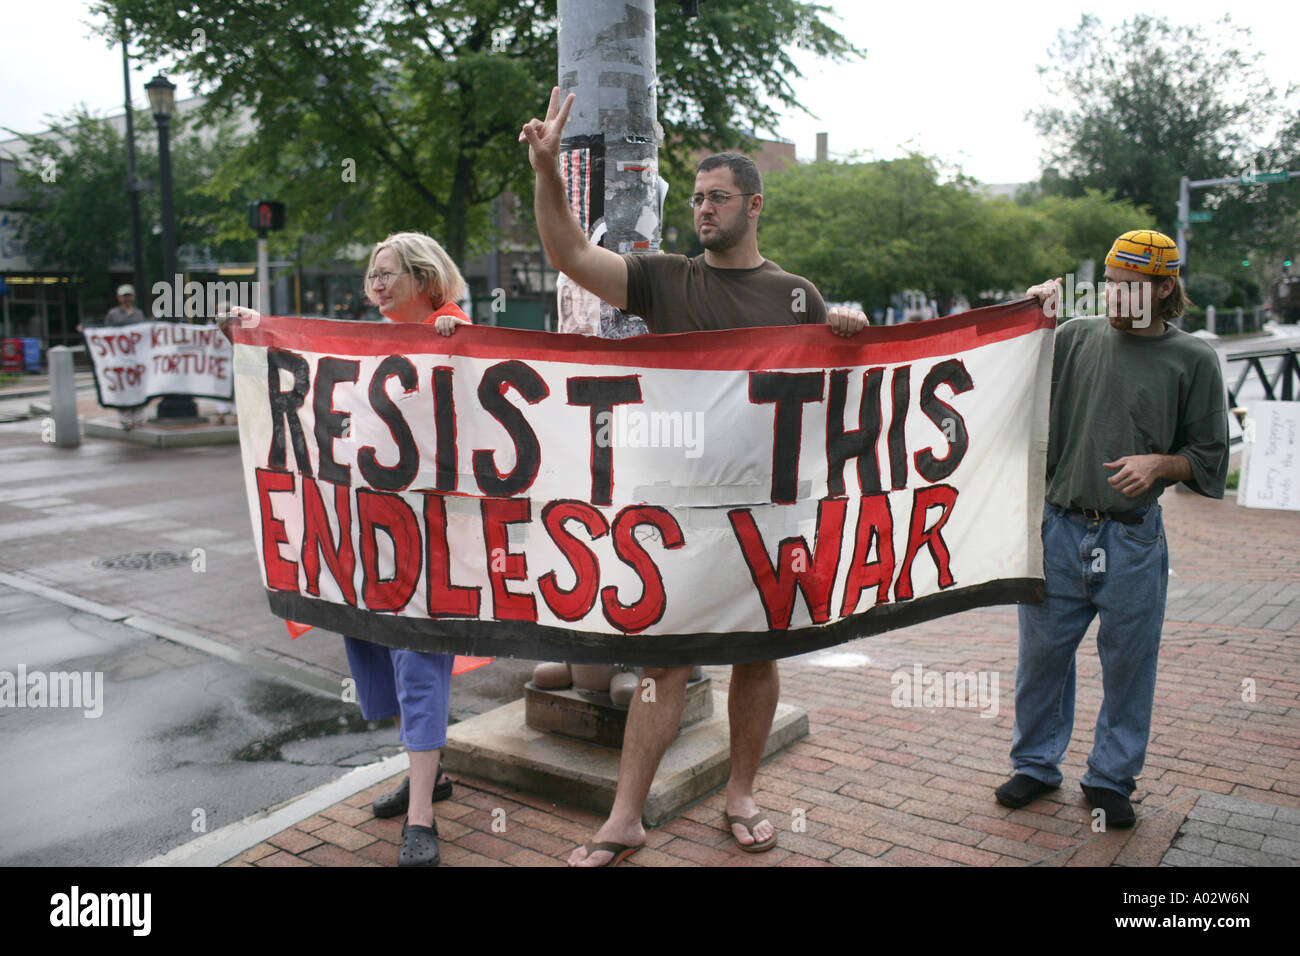 US War protesters in opposition to the Iraq war hold a sign that says resist this endless war in 2006 Stock Photo